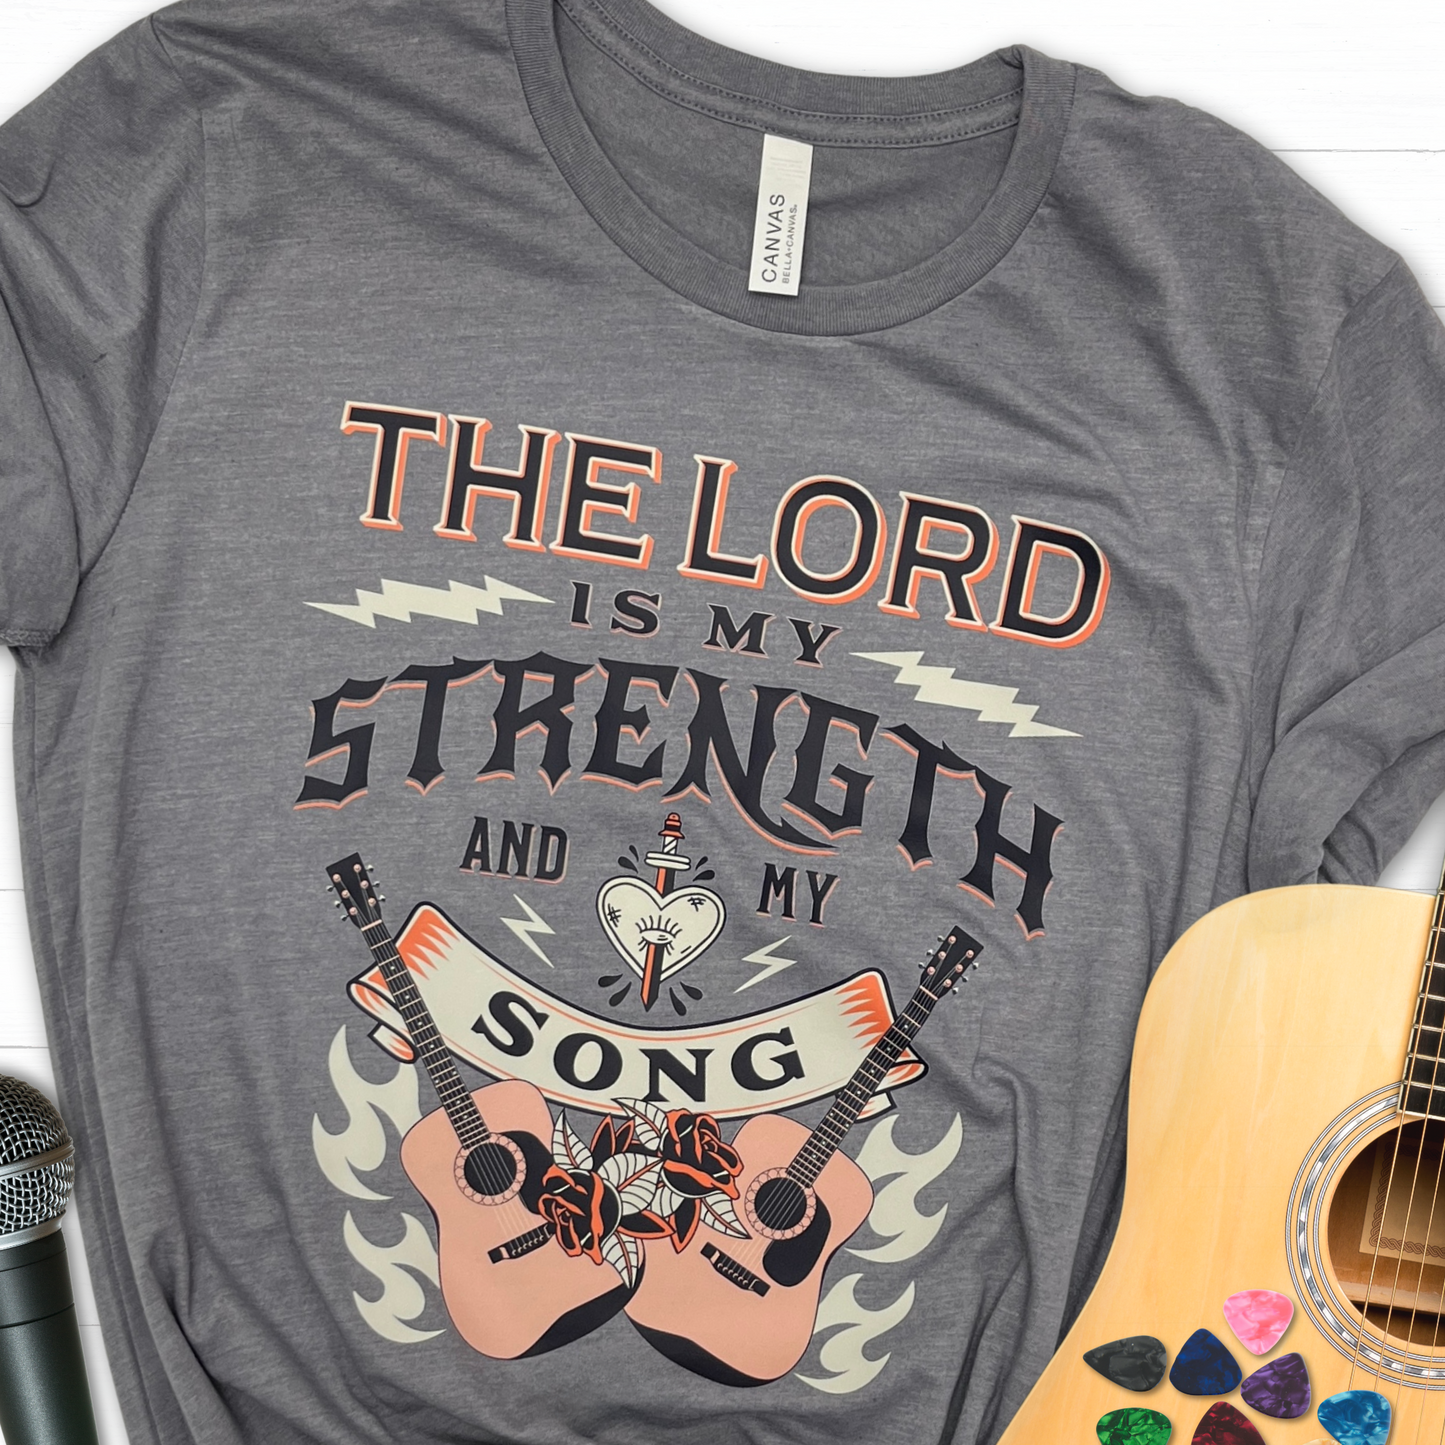 The Lord is my strength and my song tee